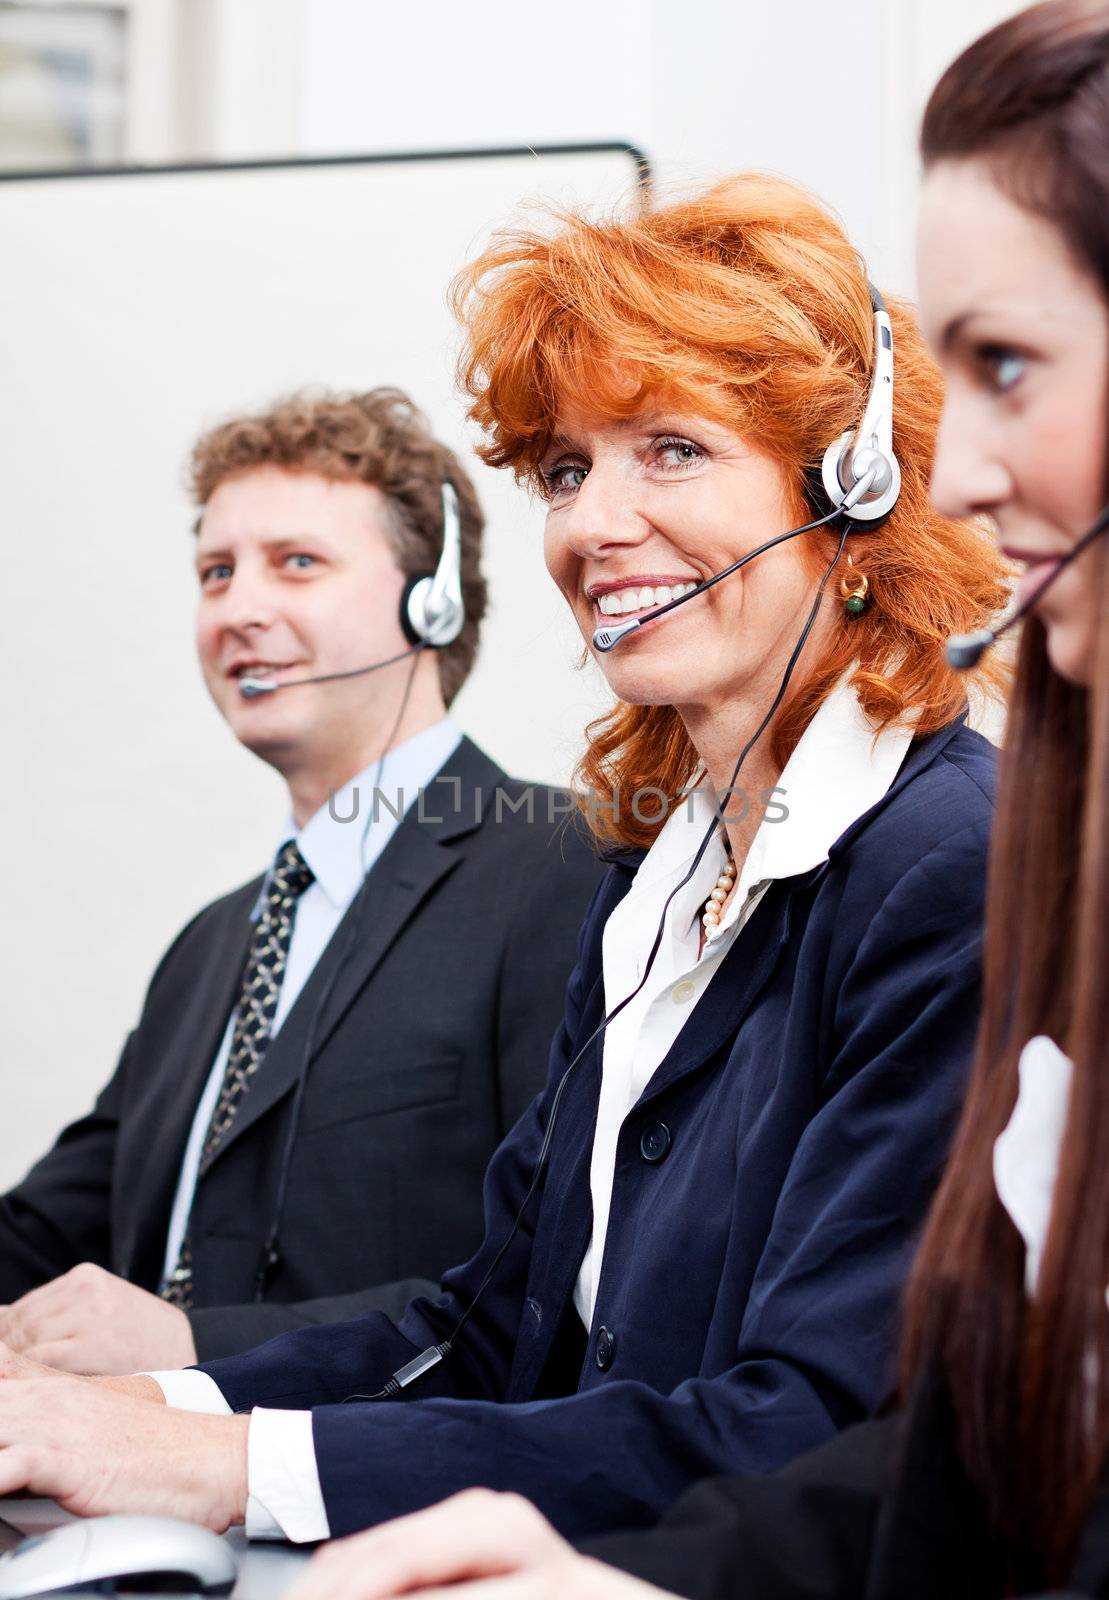 callcenter team business people with headphone  by juniart